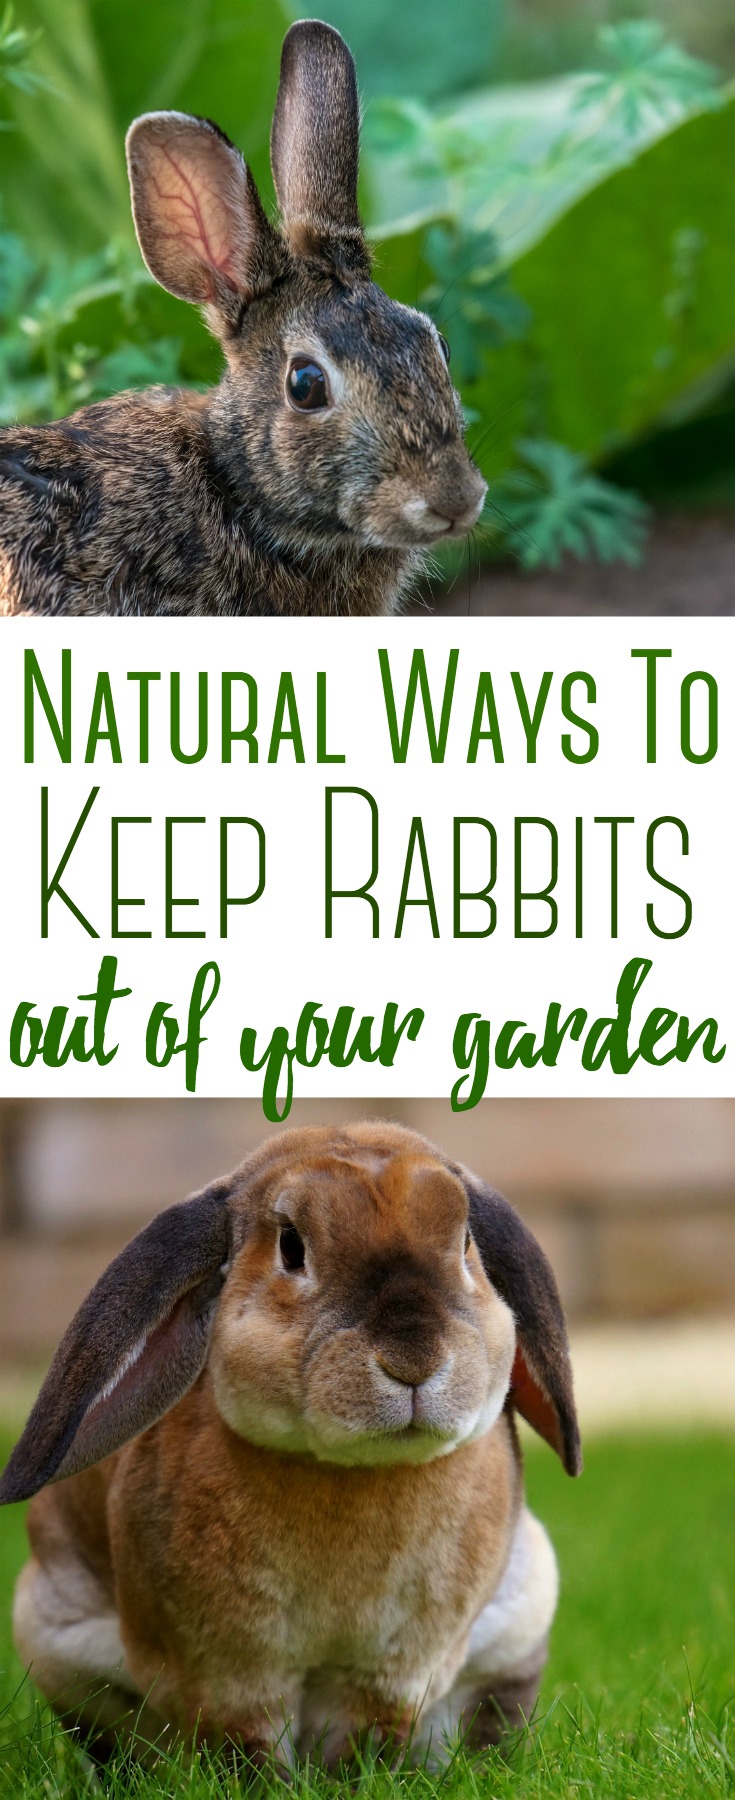 Rabbits are cute until they get into your garden. Thankfully there are several ways to keep rabbits out of your garden naturally.